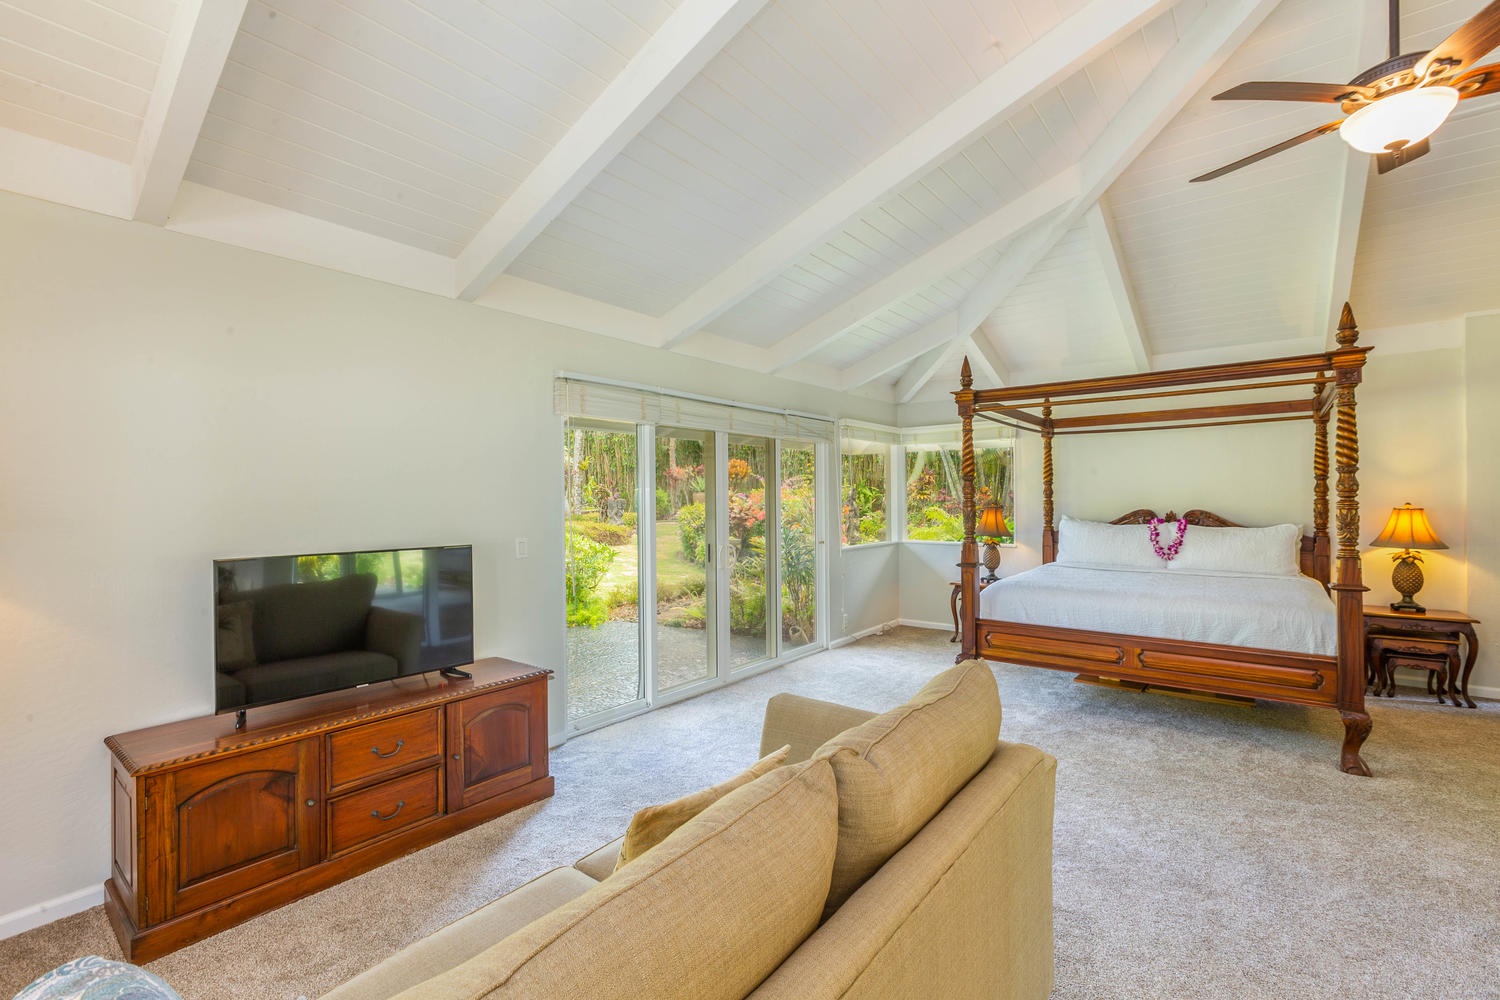 Princeville Vacation Rentals, Mala Hale - Comfortable seating area in the primary bedroom